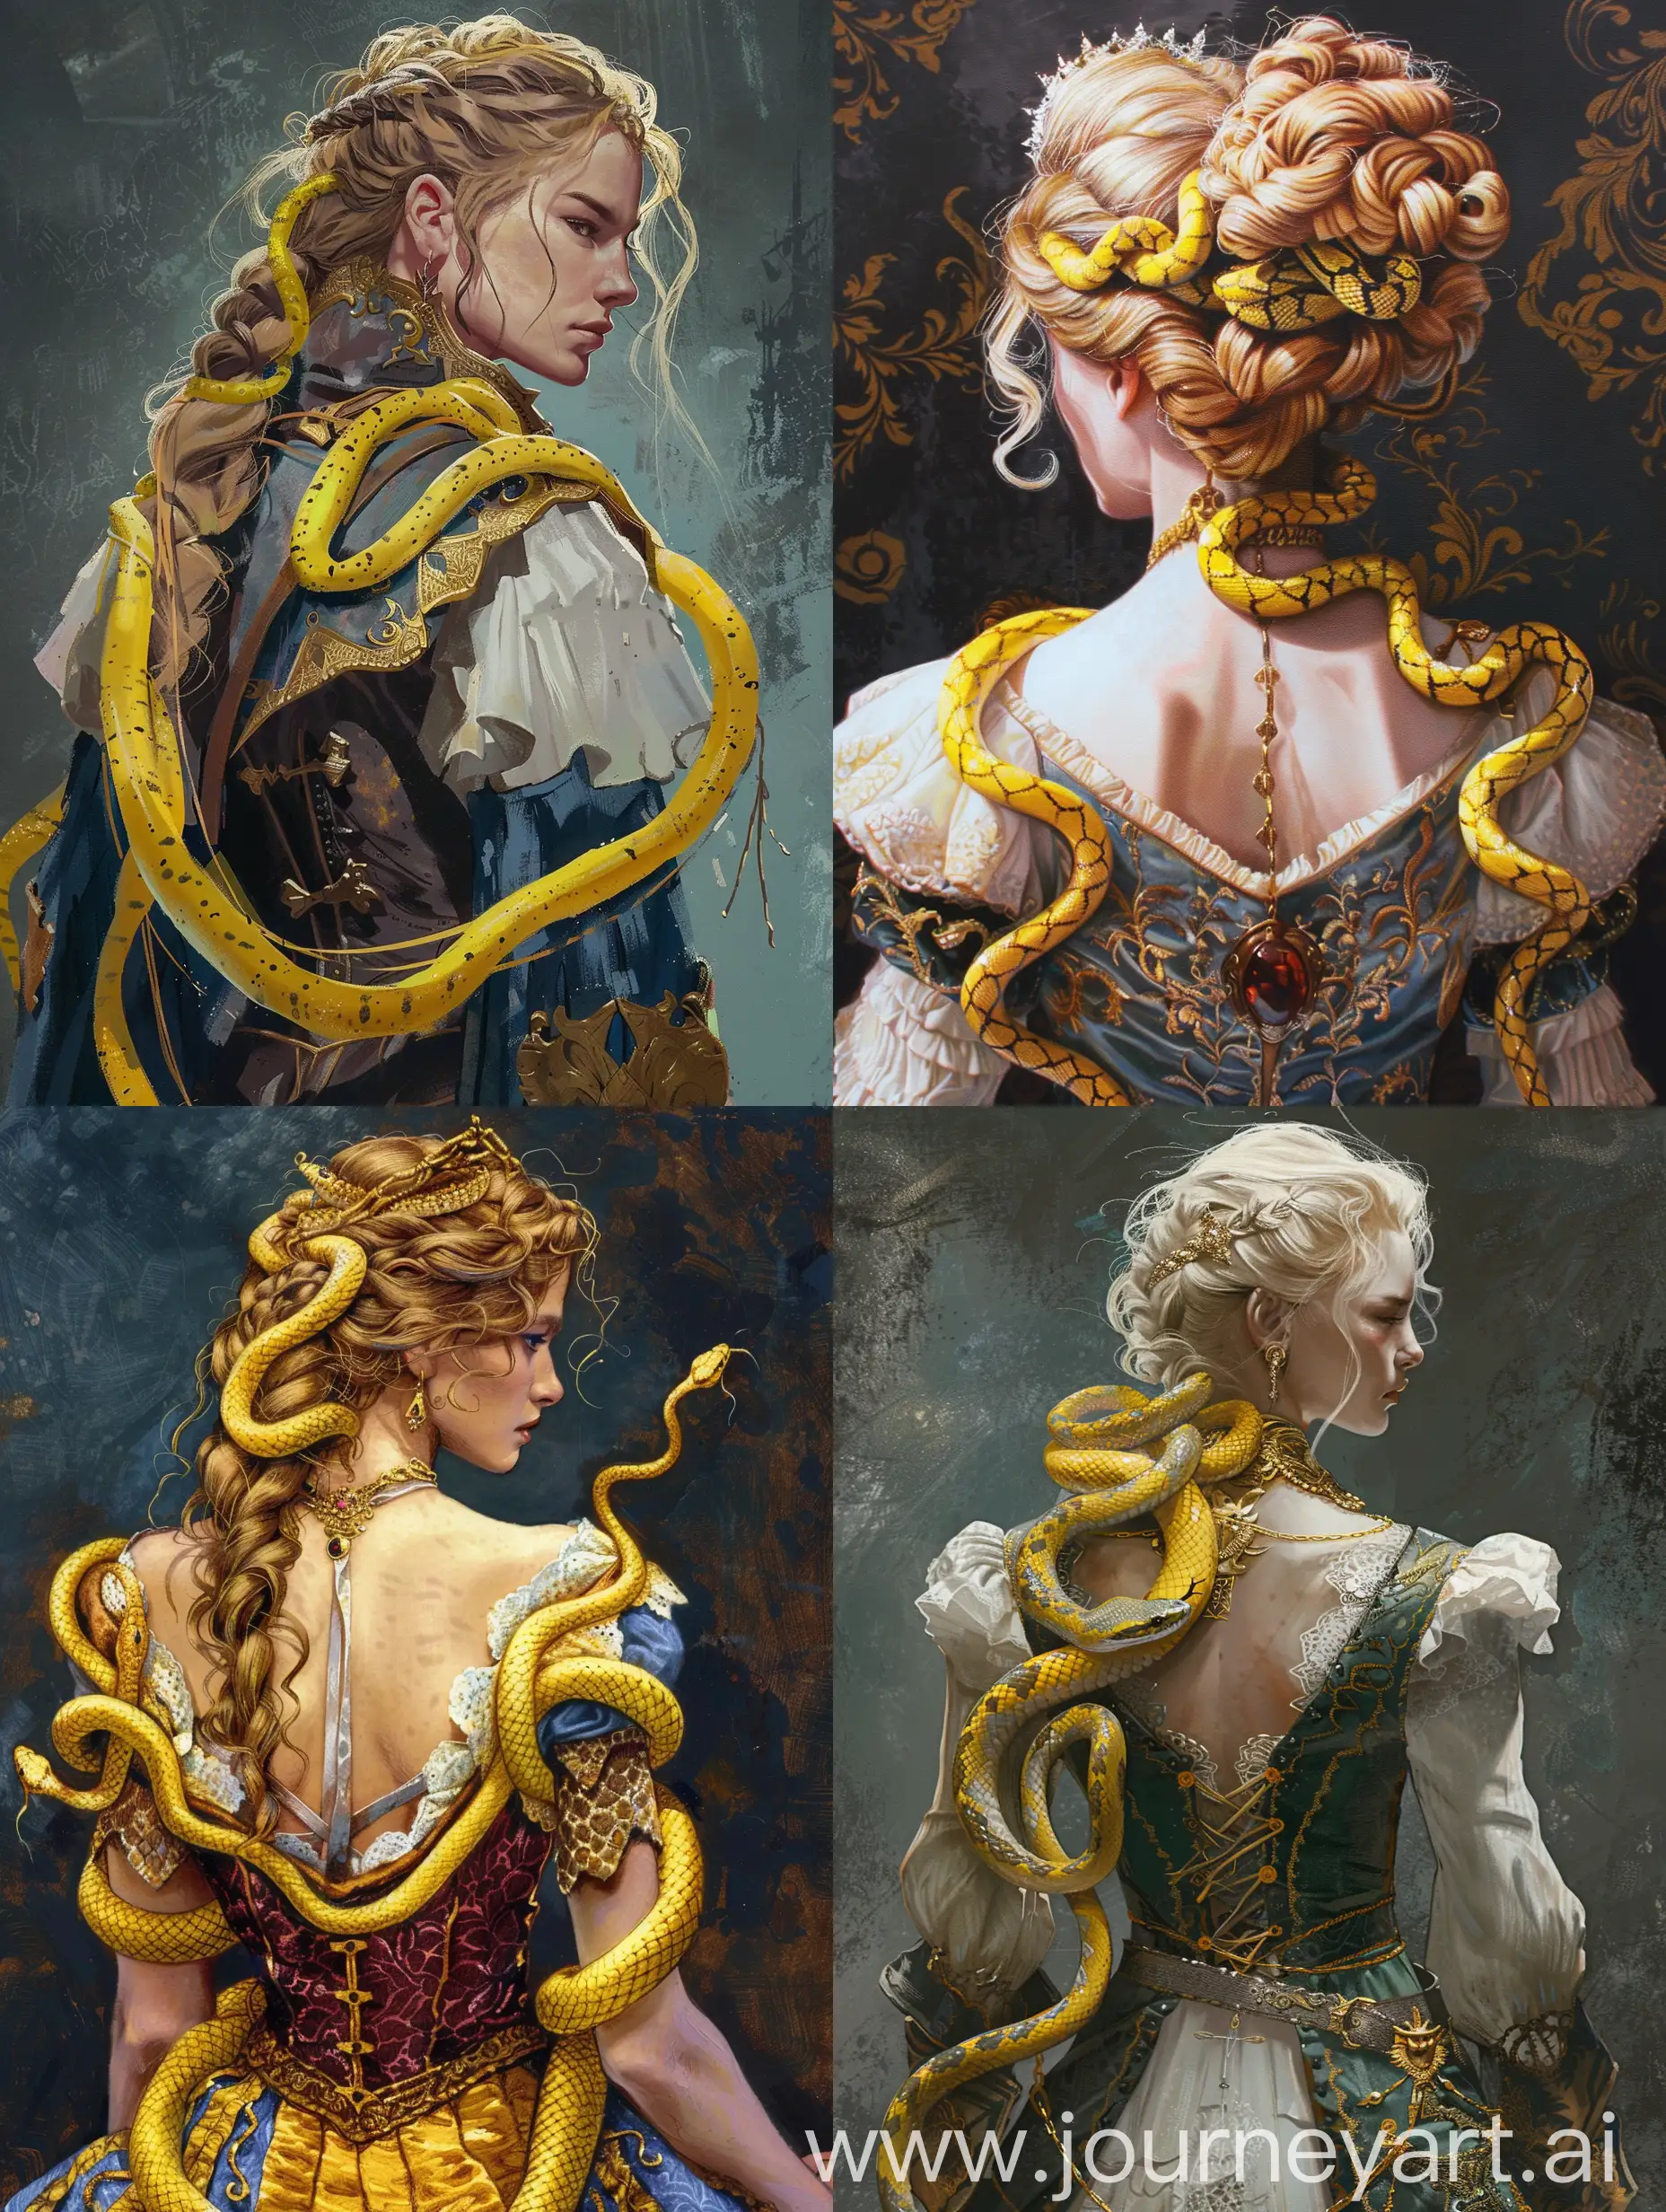 Noble-Medusa-with-Yellow-Snakes-in-Fantasy-Art